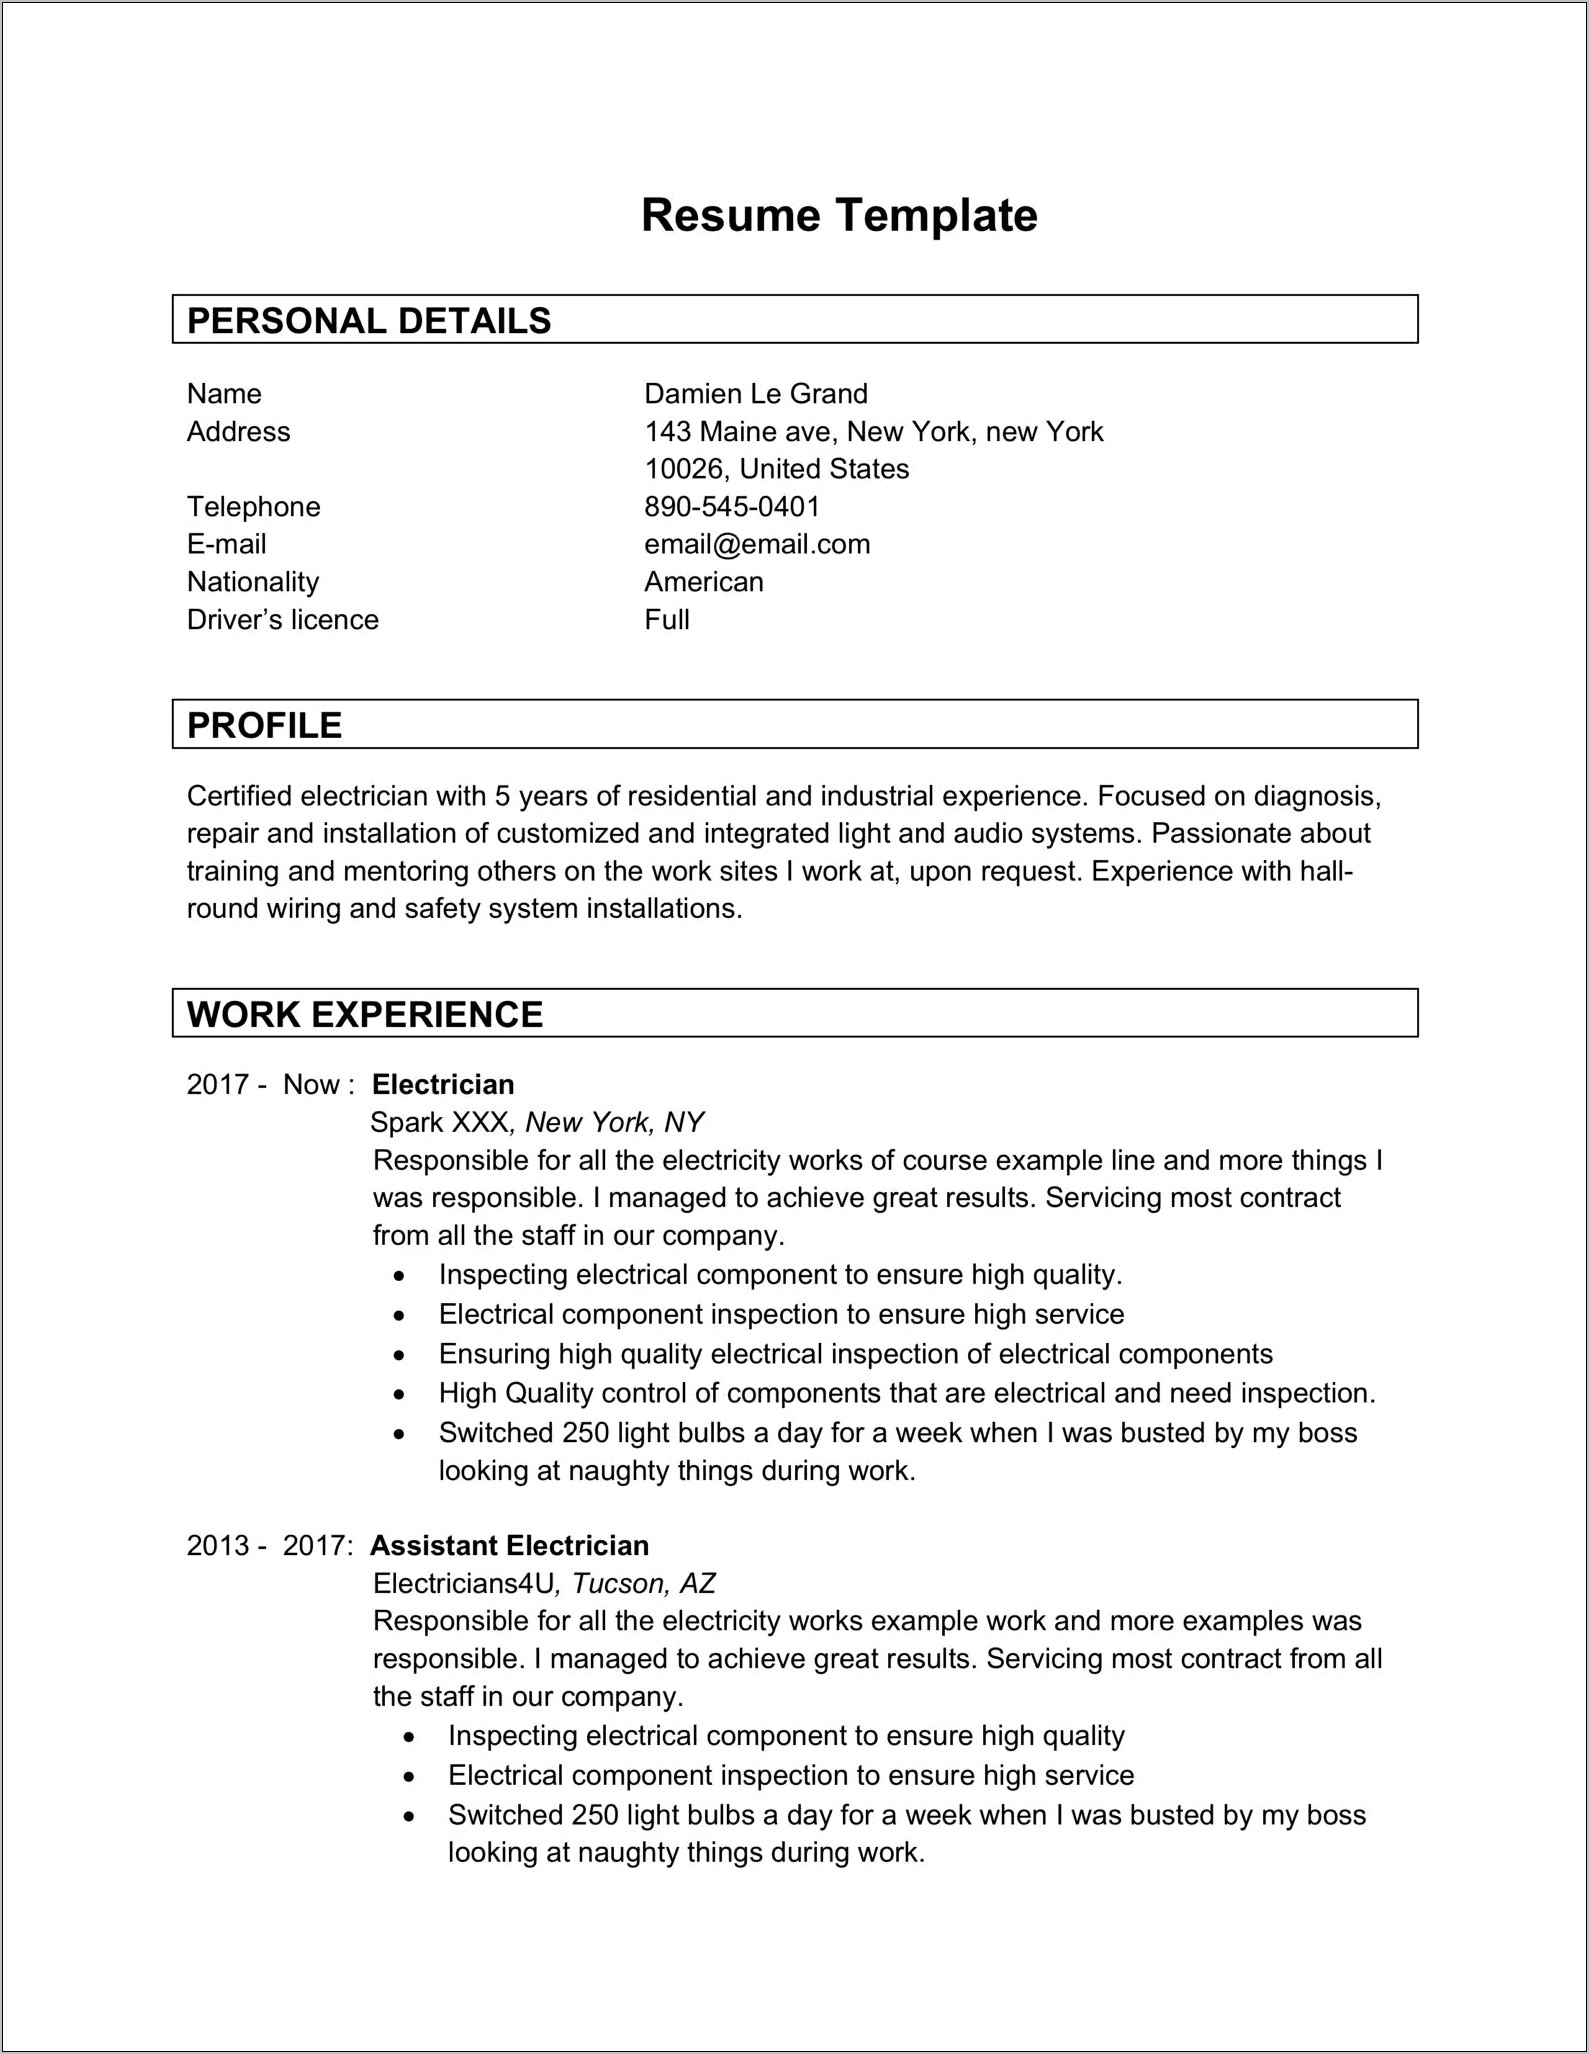 Resume Word To Use Other Than Experienced